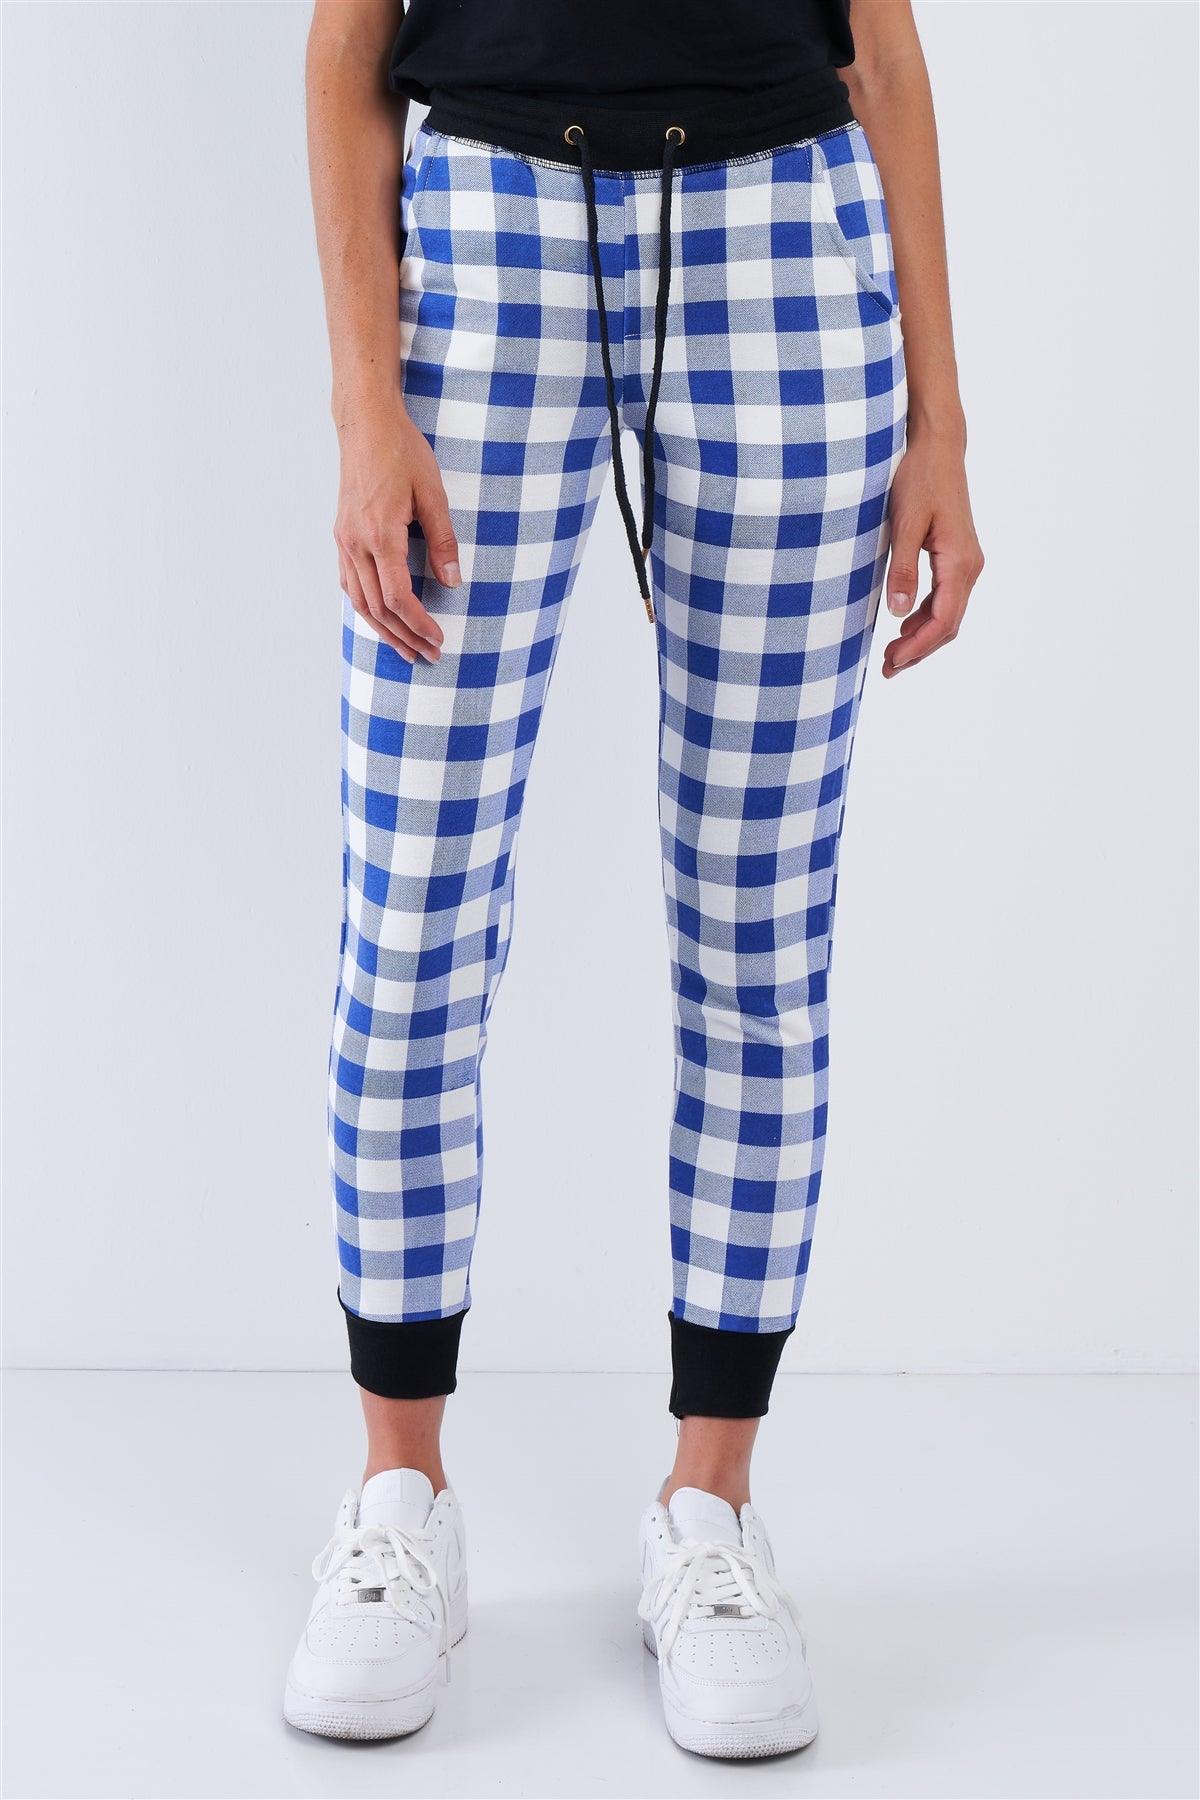 Blue And White Checkered Fitted Jogger Sweat Pants